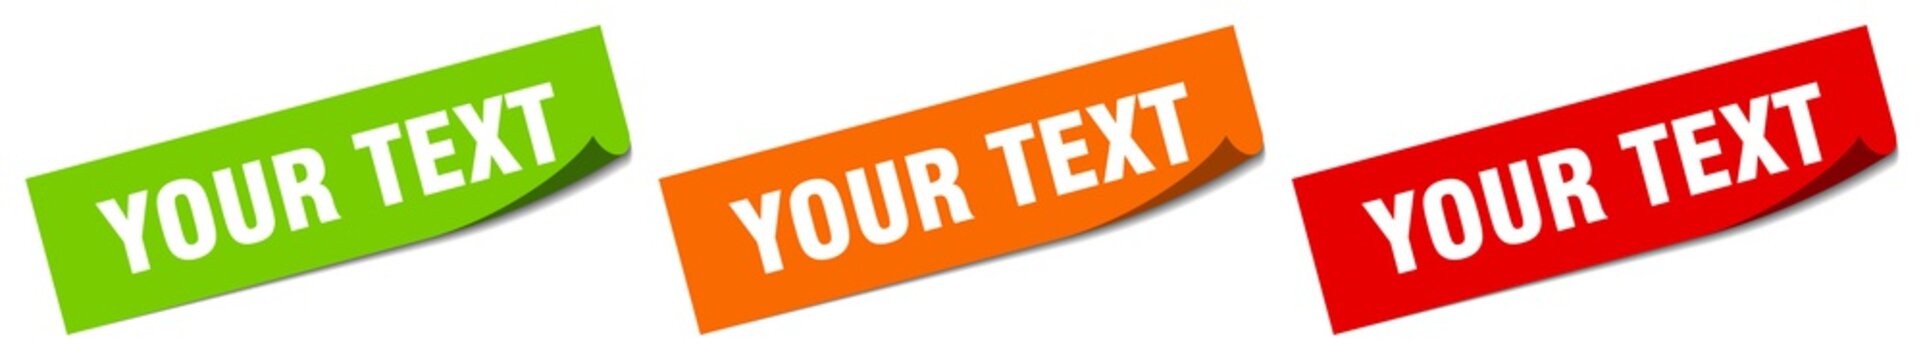 your text sticker. your text square isolated sign. your text label